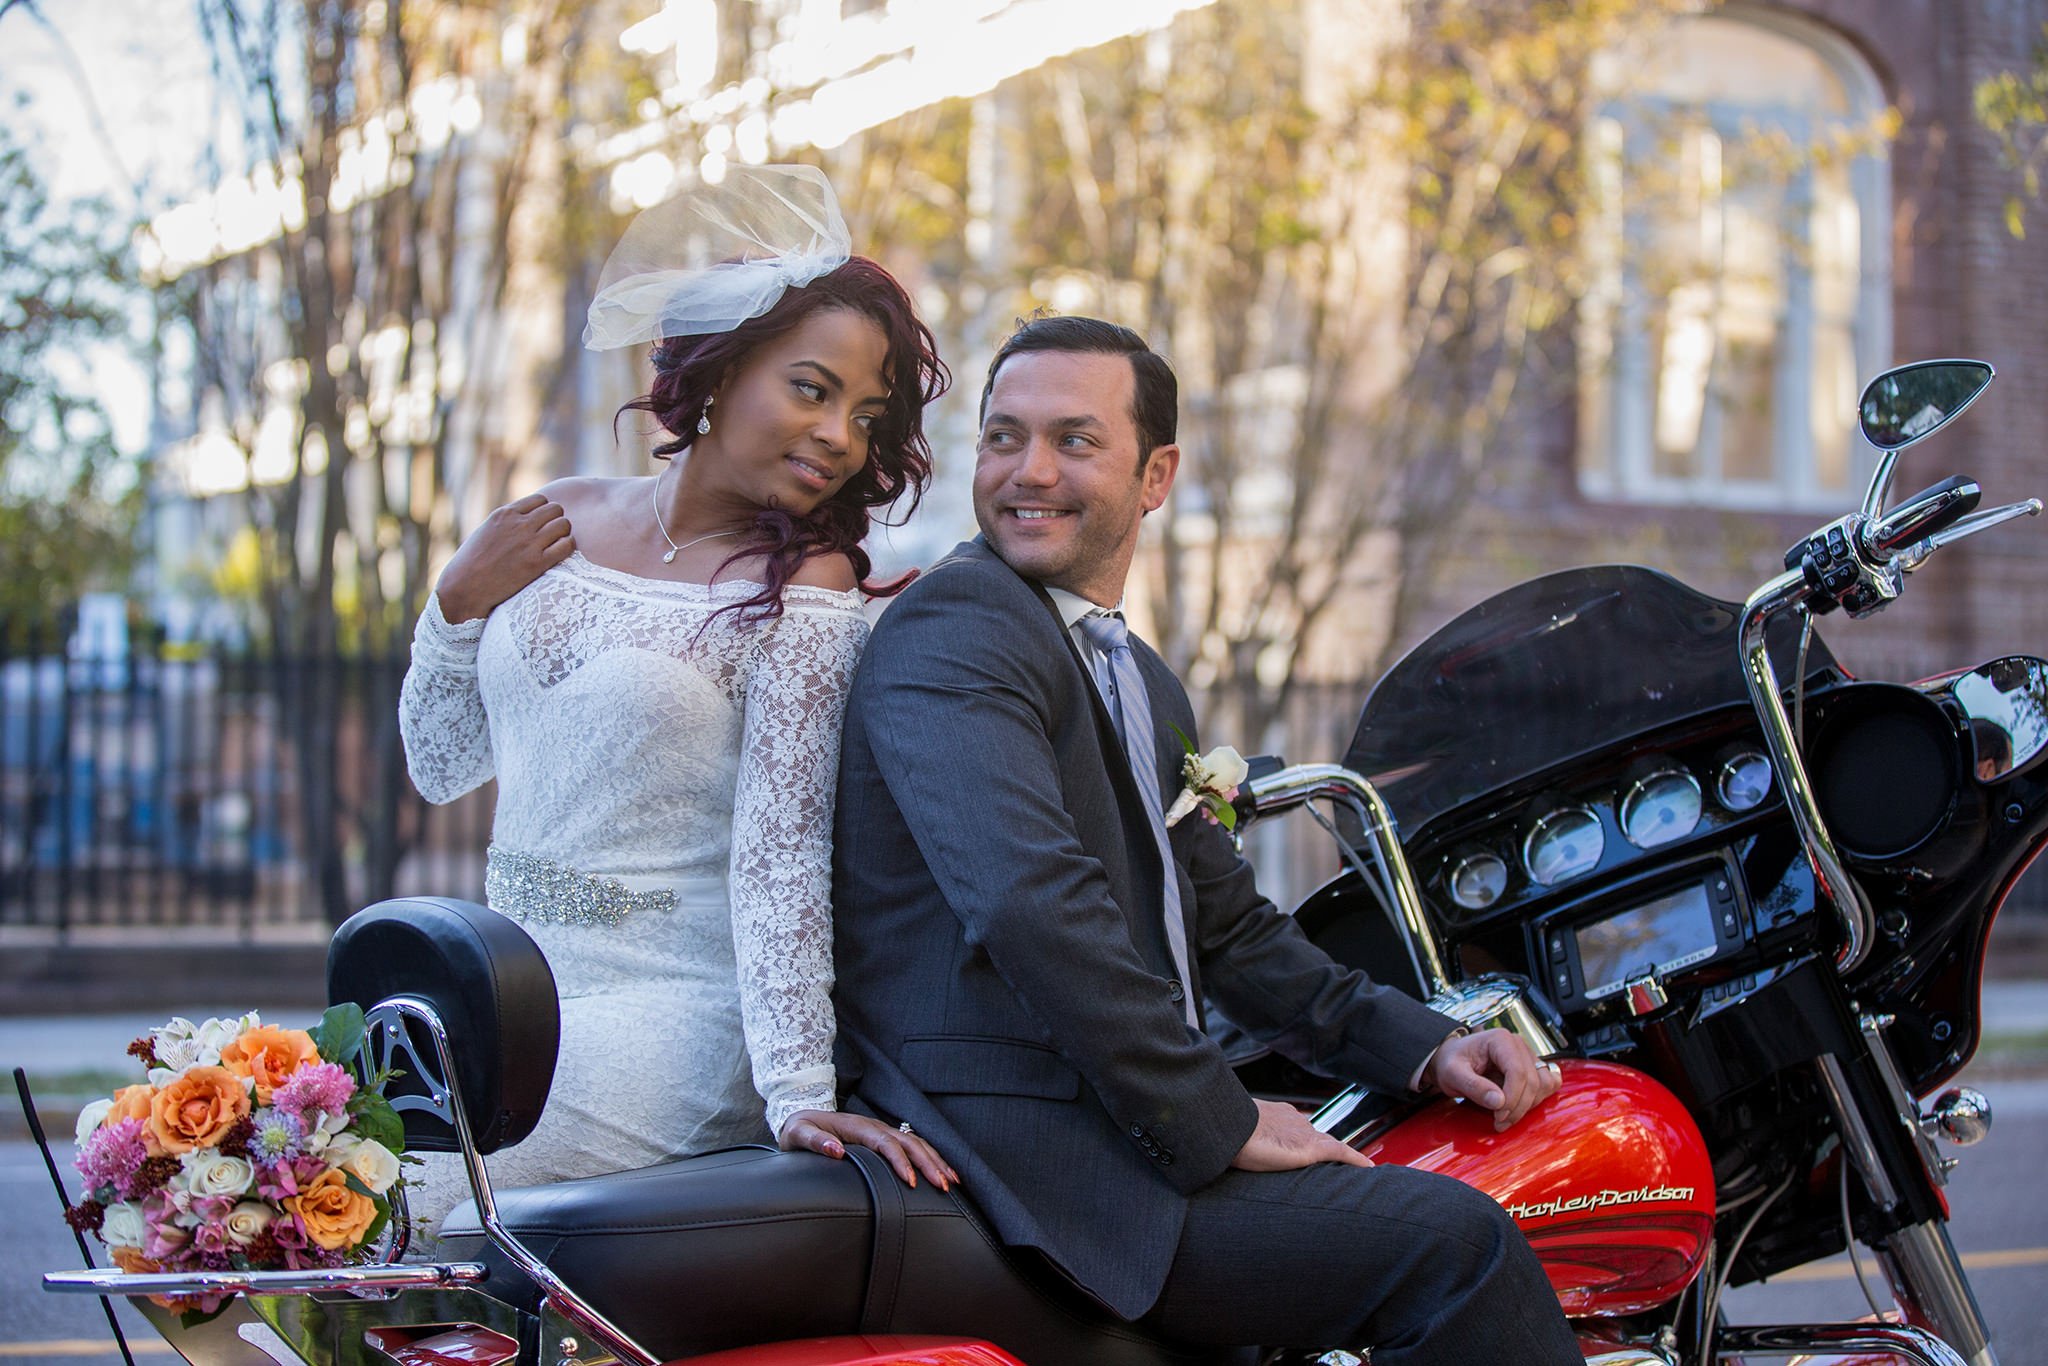 The couple is sitting on the ride motorbike, the bride and the groom are looking at each other